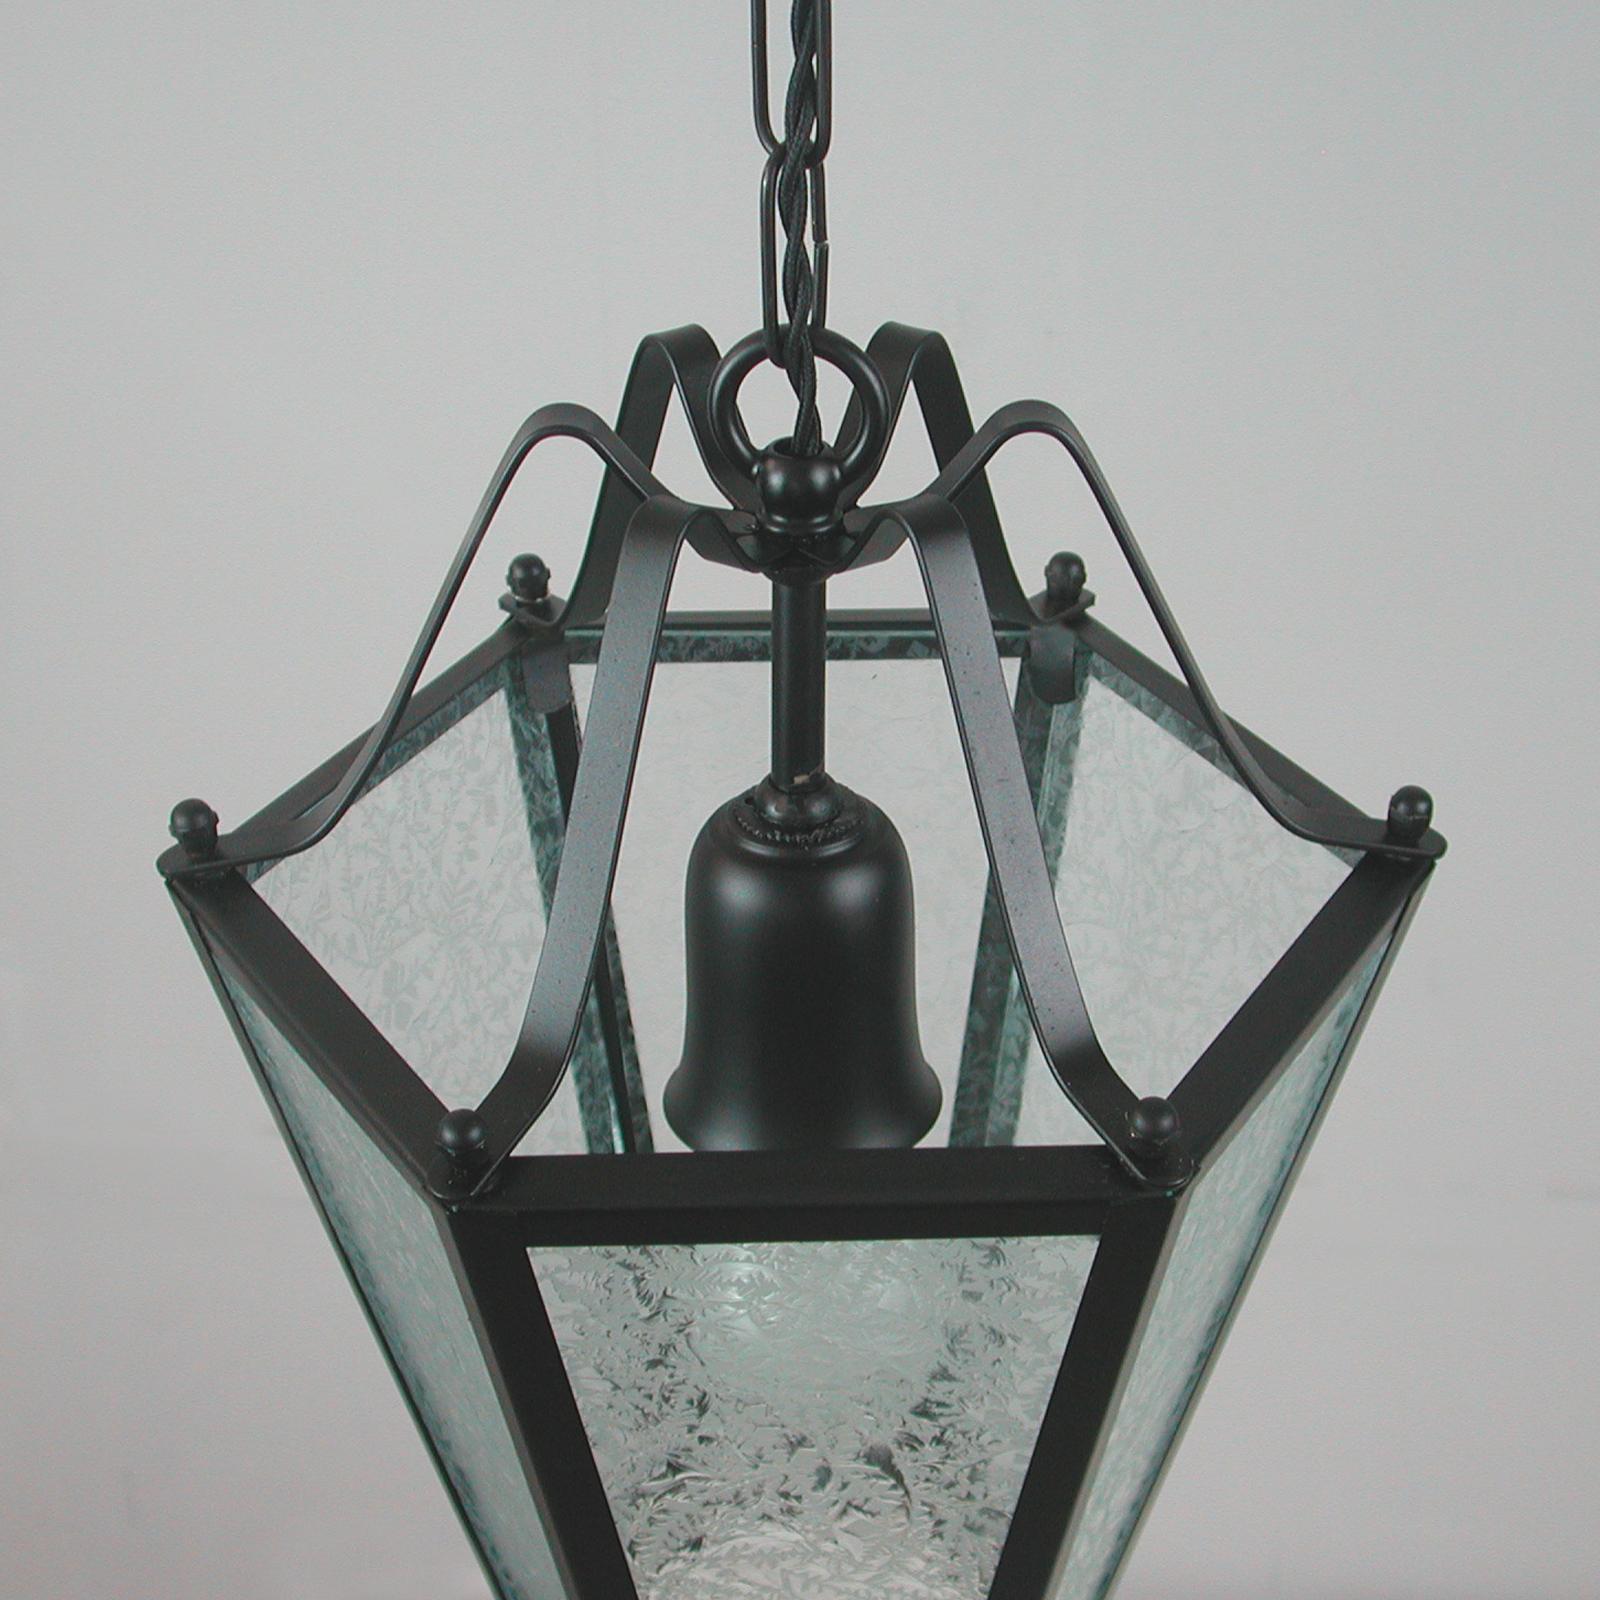 1940s Italian Black Lacquered Metal and Ice Flower Glass Lantern For Sale 4